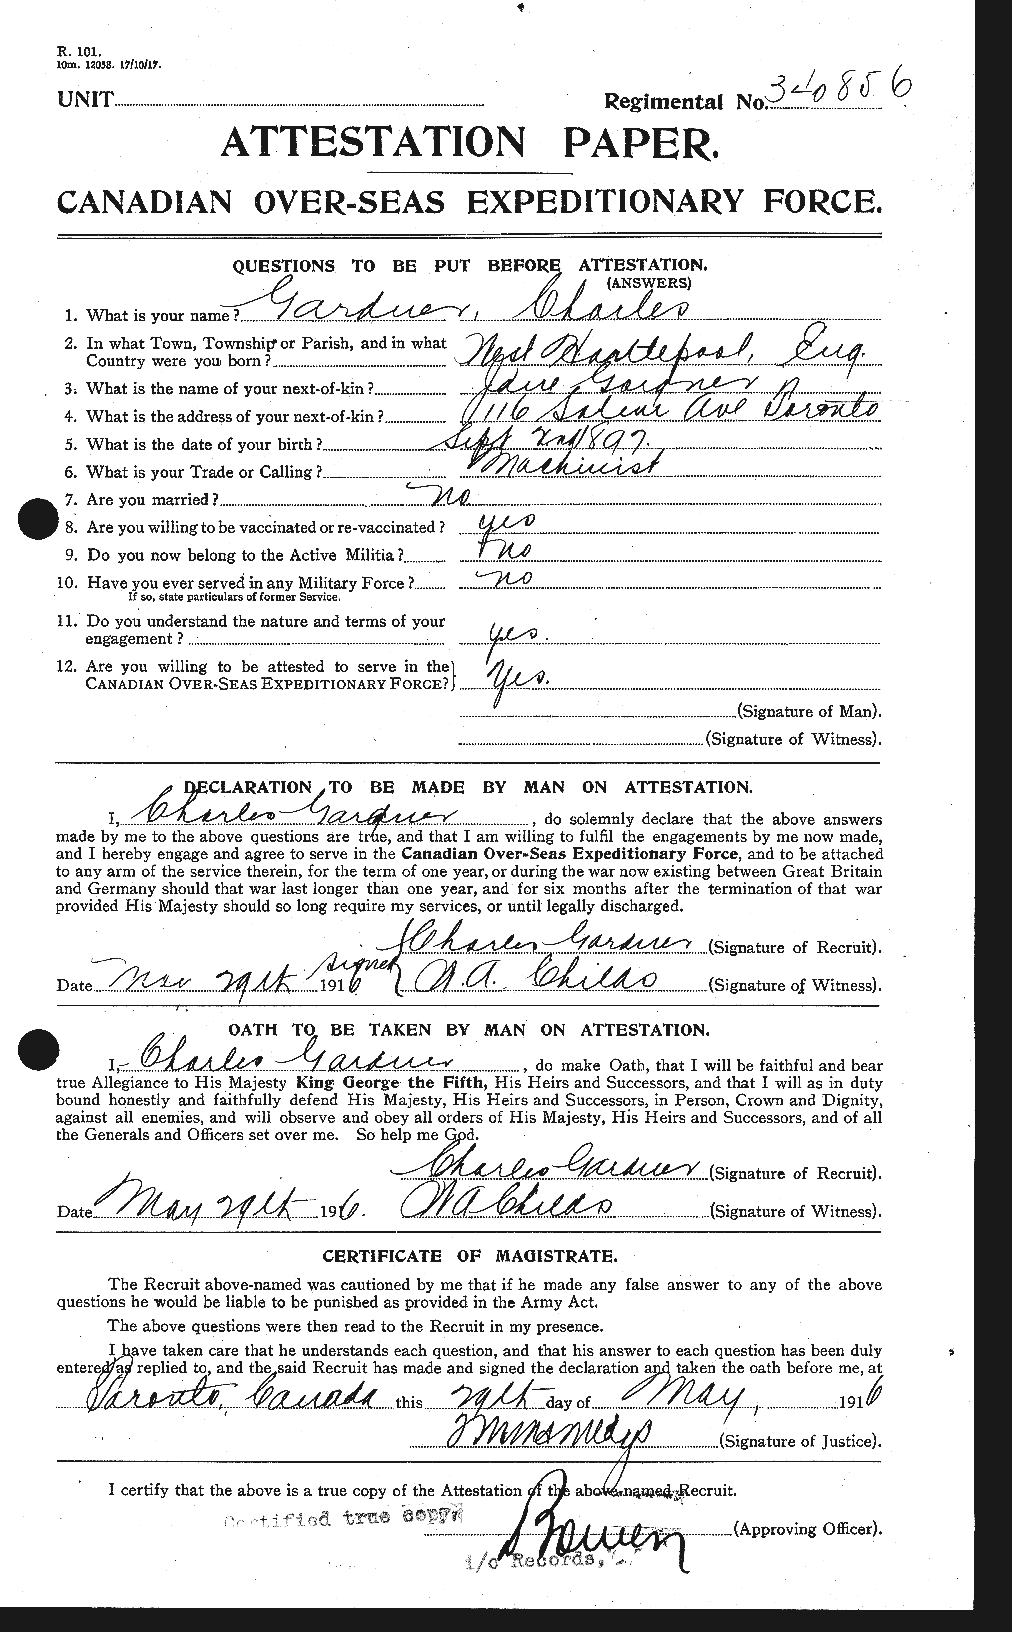 Personnel Records of the First World War - CEF 340973a